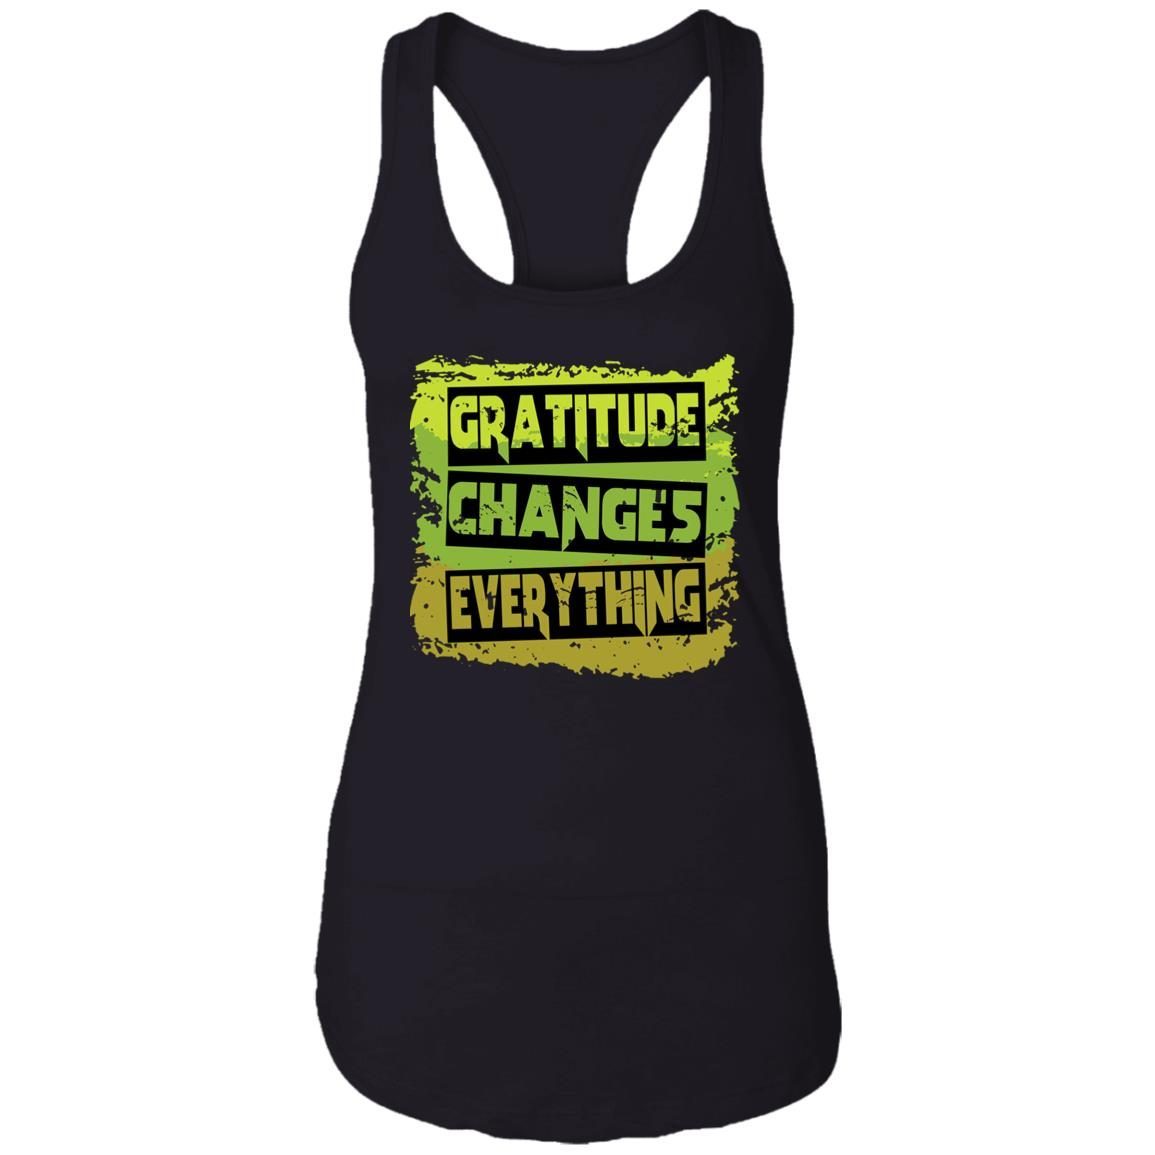 Gratitude Changes Everything Funny Quote shirt 8